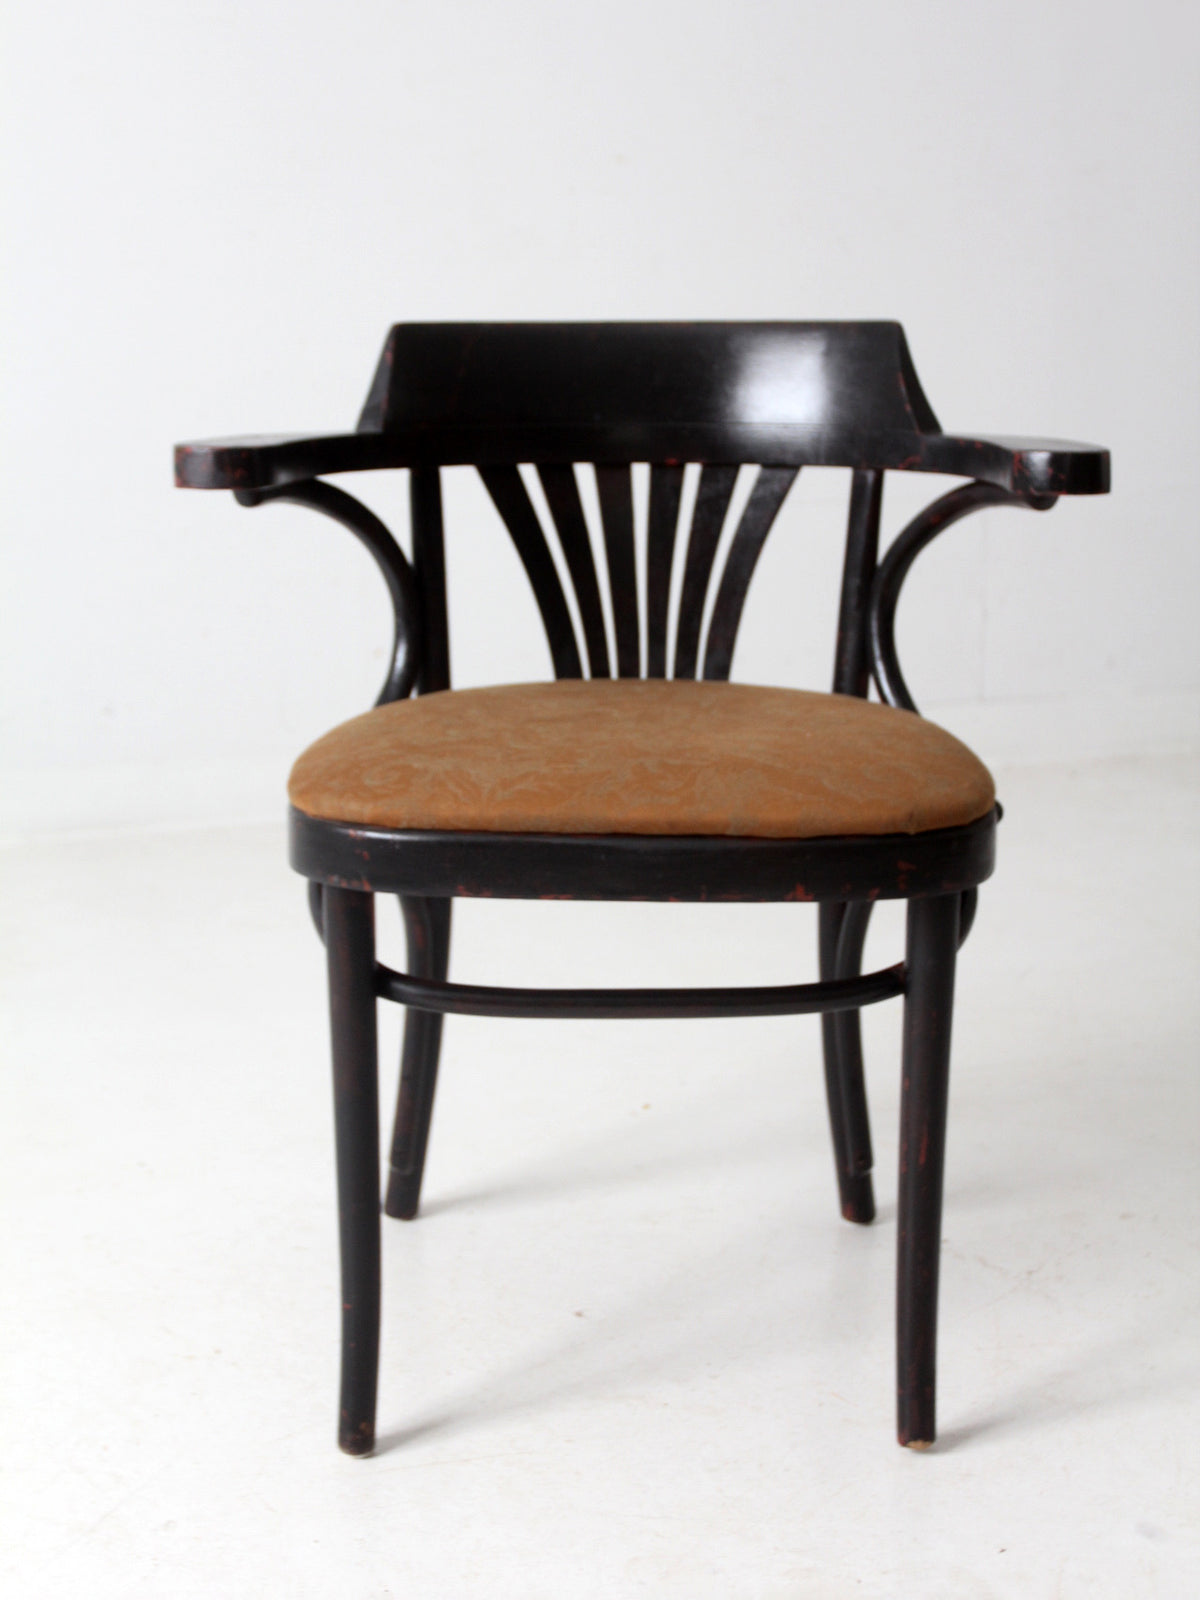 vintage bentwood chair with upholstered seat